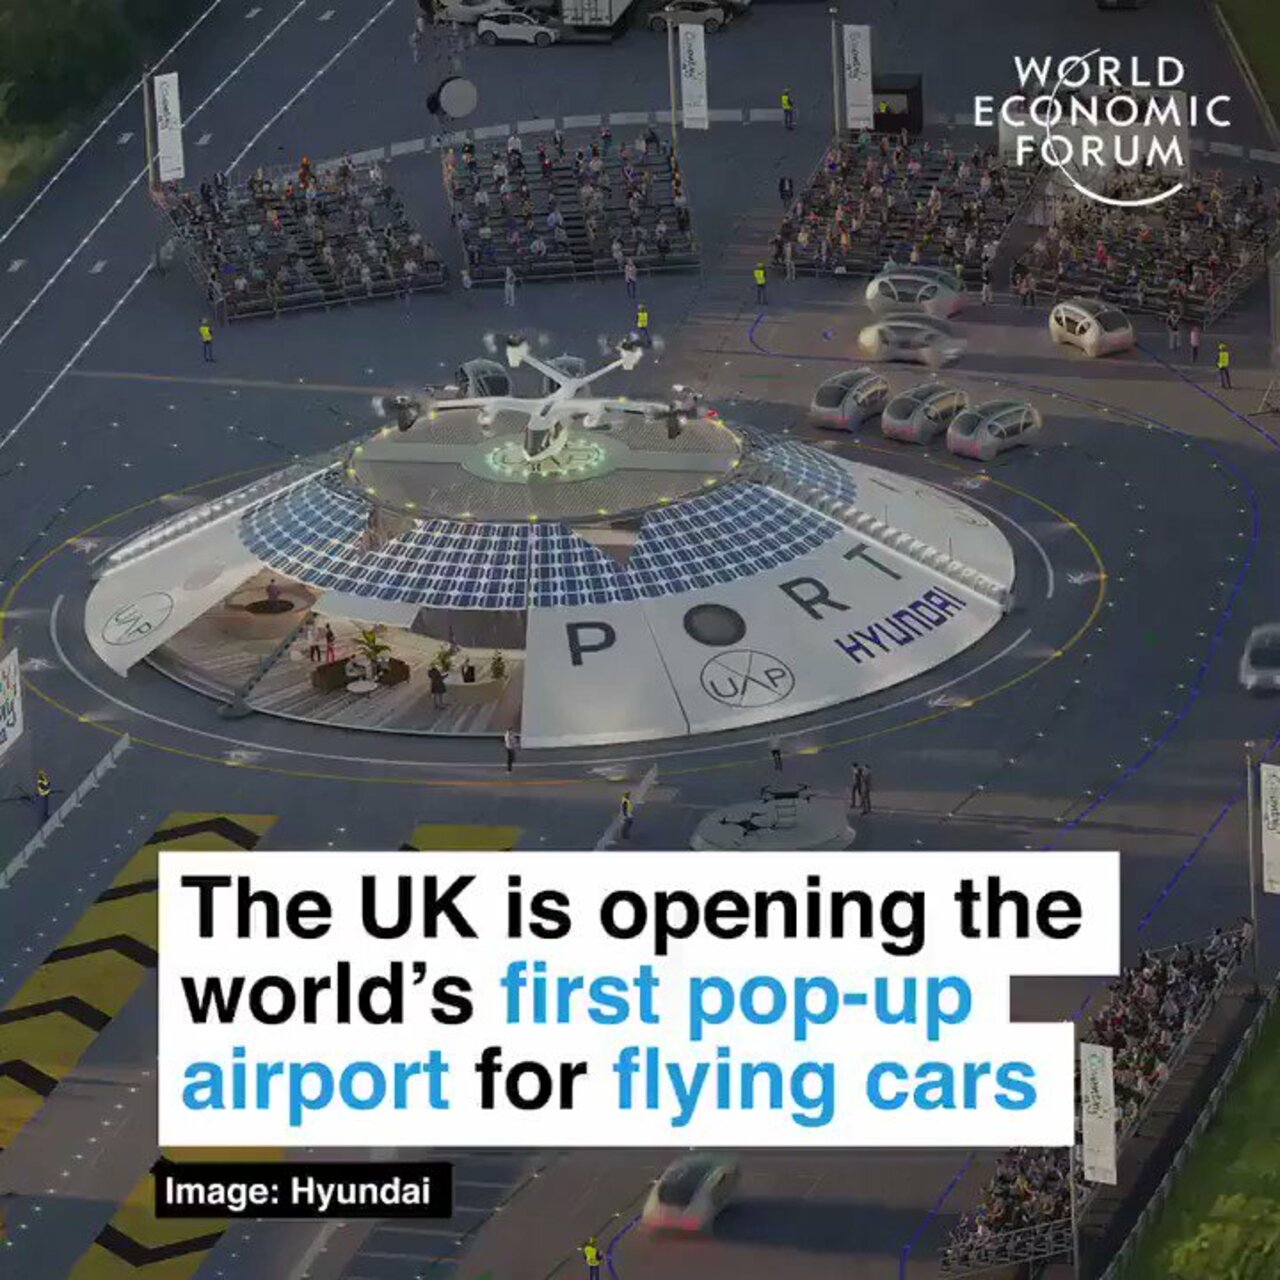 The UK is opening the world’s first pop-up airport for flying cars by @wef #Robotics #Sustainability #CleanEnergy #Engineering #Innovation #Automation #Transport  Cc: @rethinkrobotics @ronald_vanloon @pbalakrishnarao @marutitech @chr1sa https://t.co/DW6eBRke70